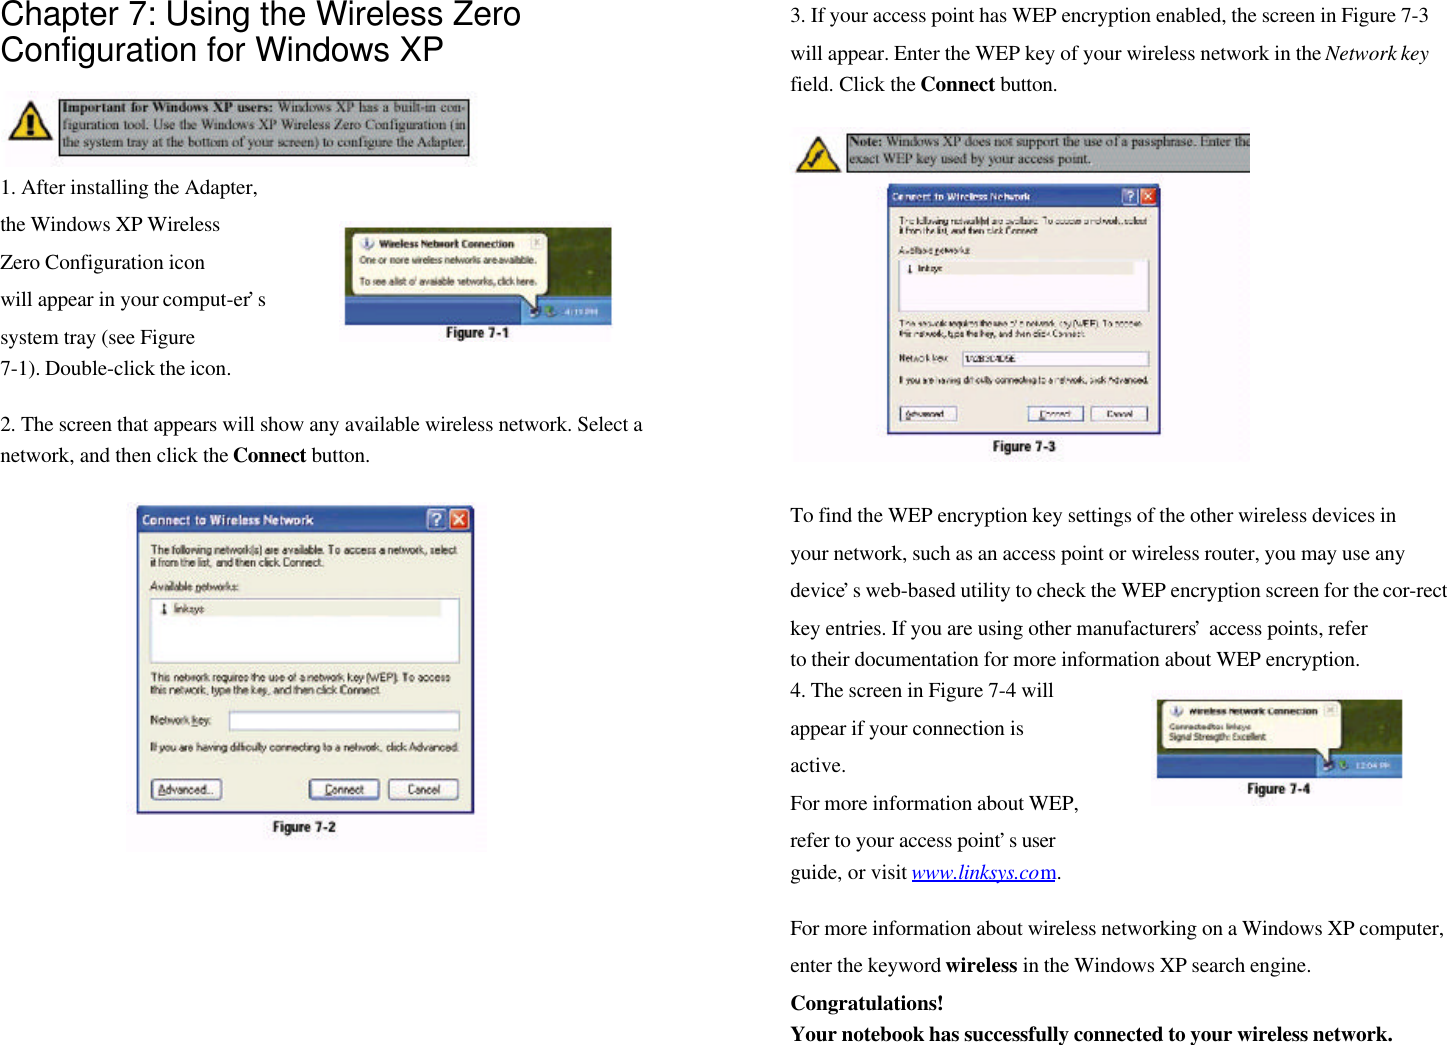 Chapter 7: Using the Wireless ZeroConfiguration for Windows XP1. After installing the Adapter,the Windows XP WirelessZero Configuration iconwill appear in your comput-er’ssystem tray (see Figure7-1). Double-click the icon.2. The screen that appears will show any available wireless network. Select anetwork, and then click the Connect button.3. If your access point has WEP encryption enabled, the screen in Figure 7-3will appear. Enter the WEP key of your wireless network in the Network keyfield. Click the Connect button.To find the WEP encryption key settings of the other wireless devices inyour network, such as an access point or wireless router, you may use anydevice’s web-based utility to check the WEP encryption screen for the cor-rectkey entries. If you are using other manufacturers’ access points, referto their documentation for more information about WEP encryption.4. The screen in Figure 7-4 willappear if your connection isactive.For more information about WEP,refer to your access point’s userguide, or visit www.linksys.com.For more information about wireless networking on a Windows XP computer,enter the keyword wireless in the Windows XP search engine.Congratulations!Your notebook has successfully connected to your wireless network.